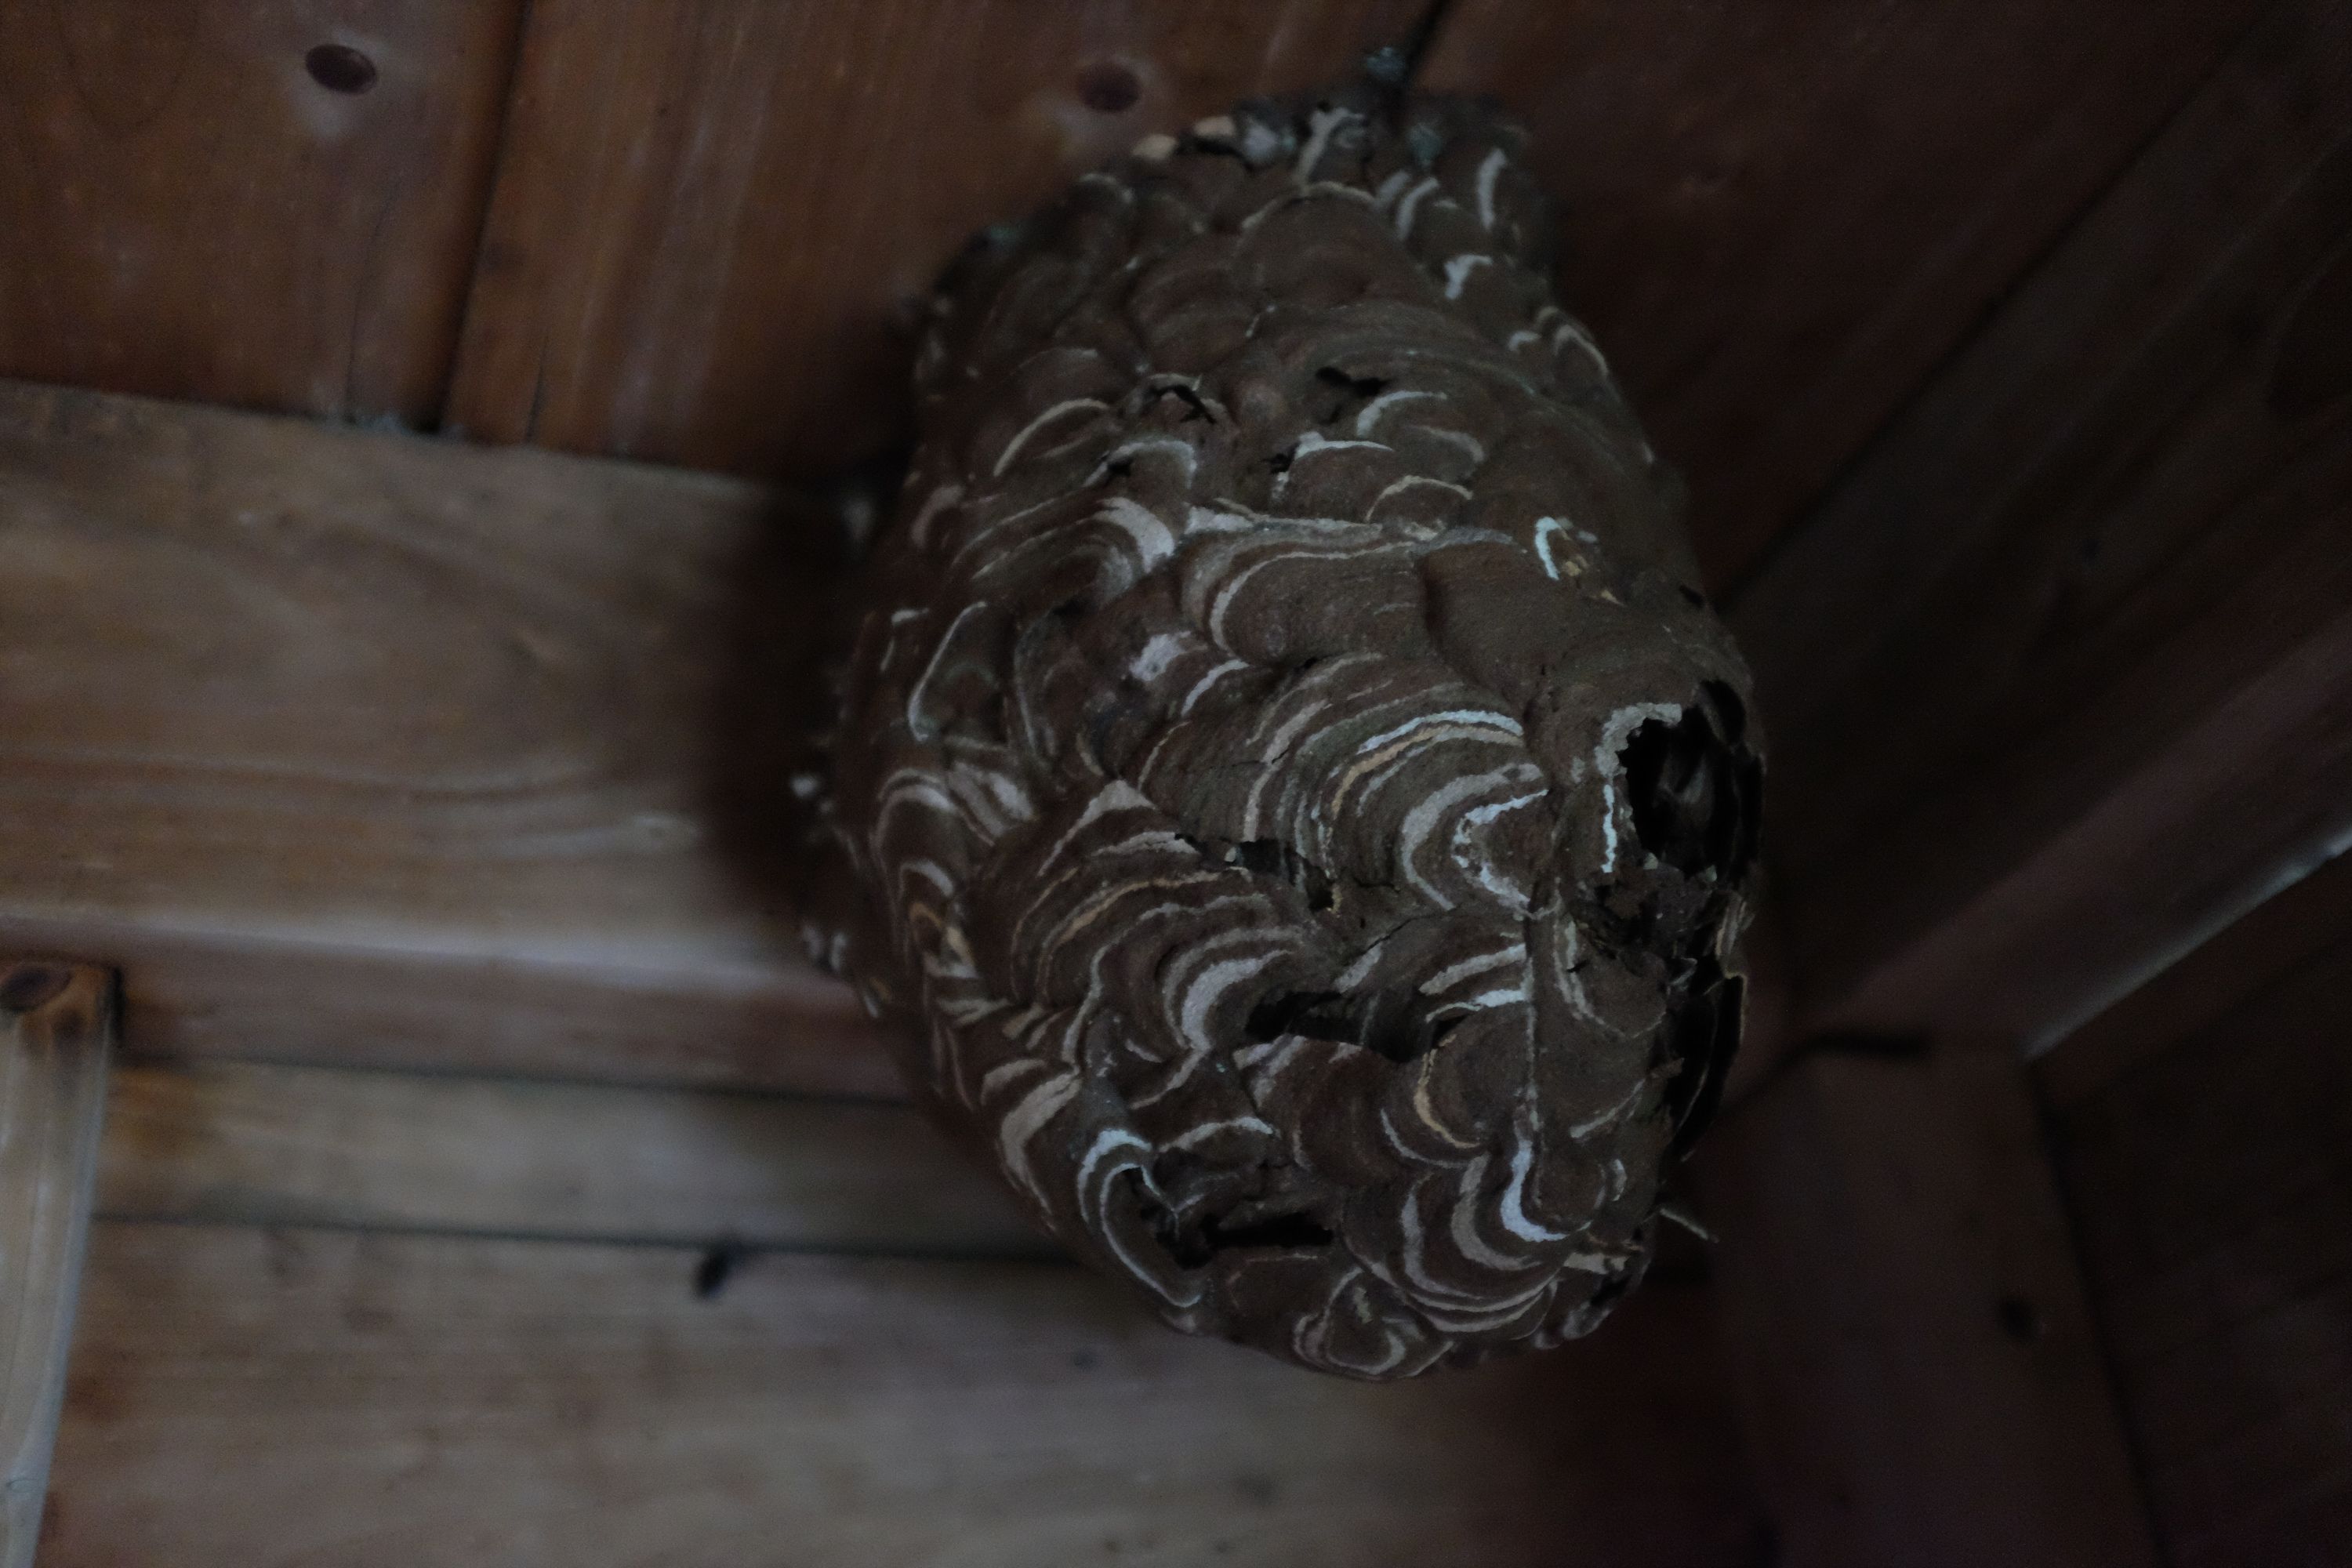 A hornets’ nest on a wooden ceiling.